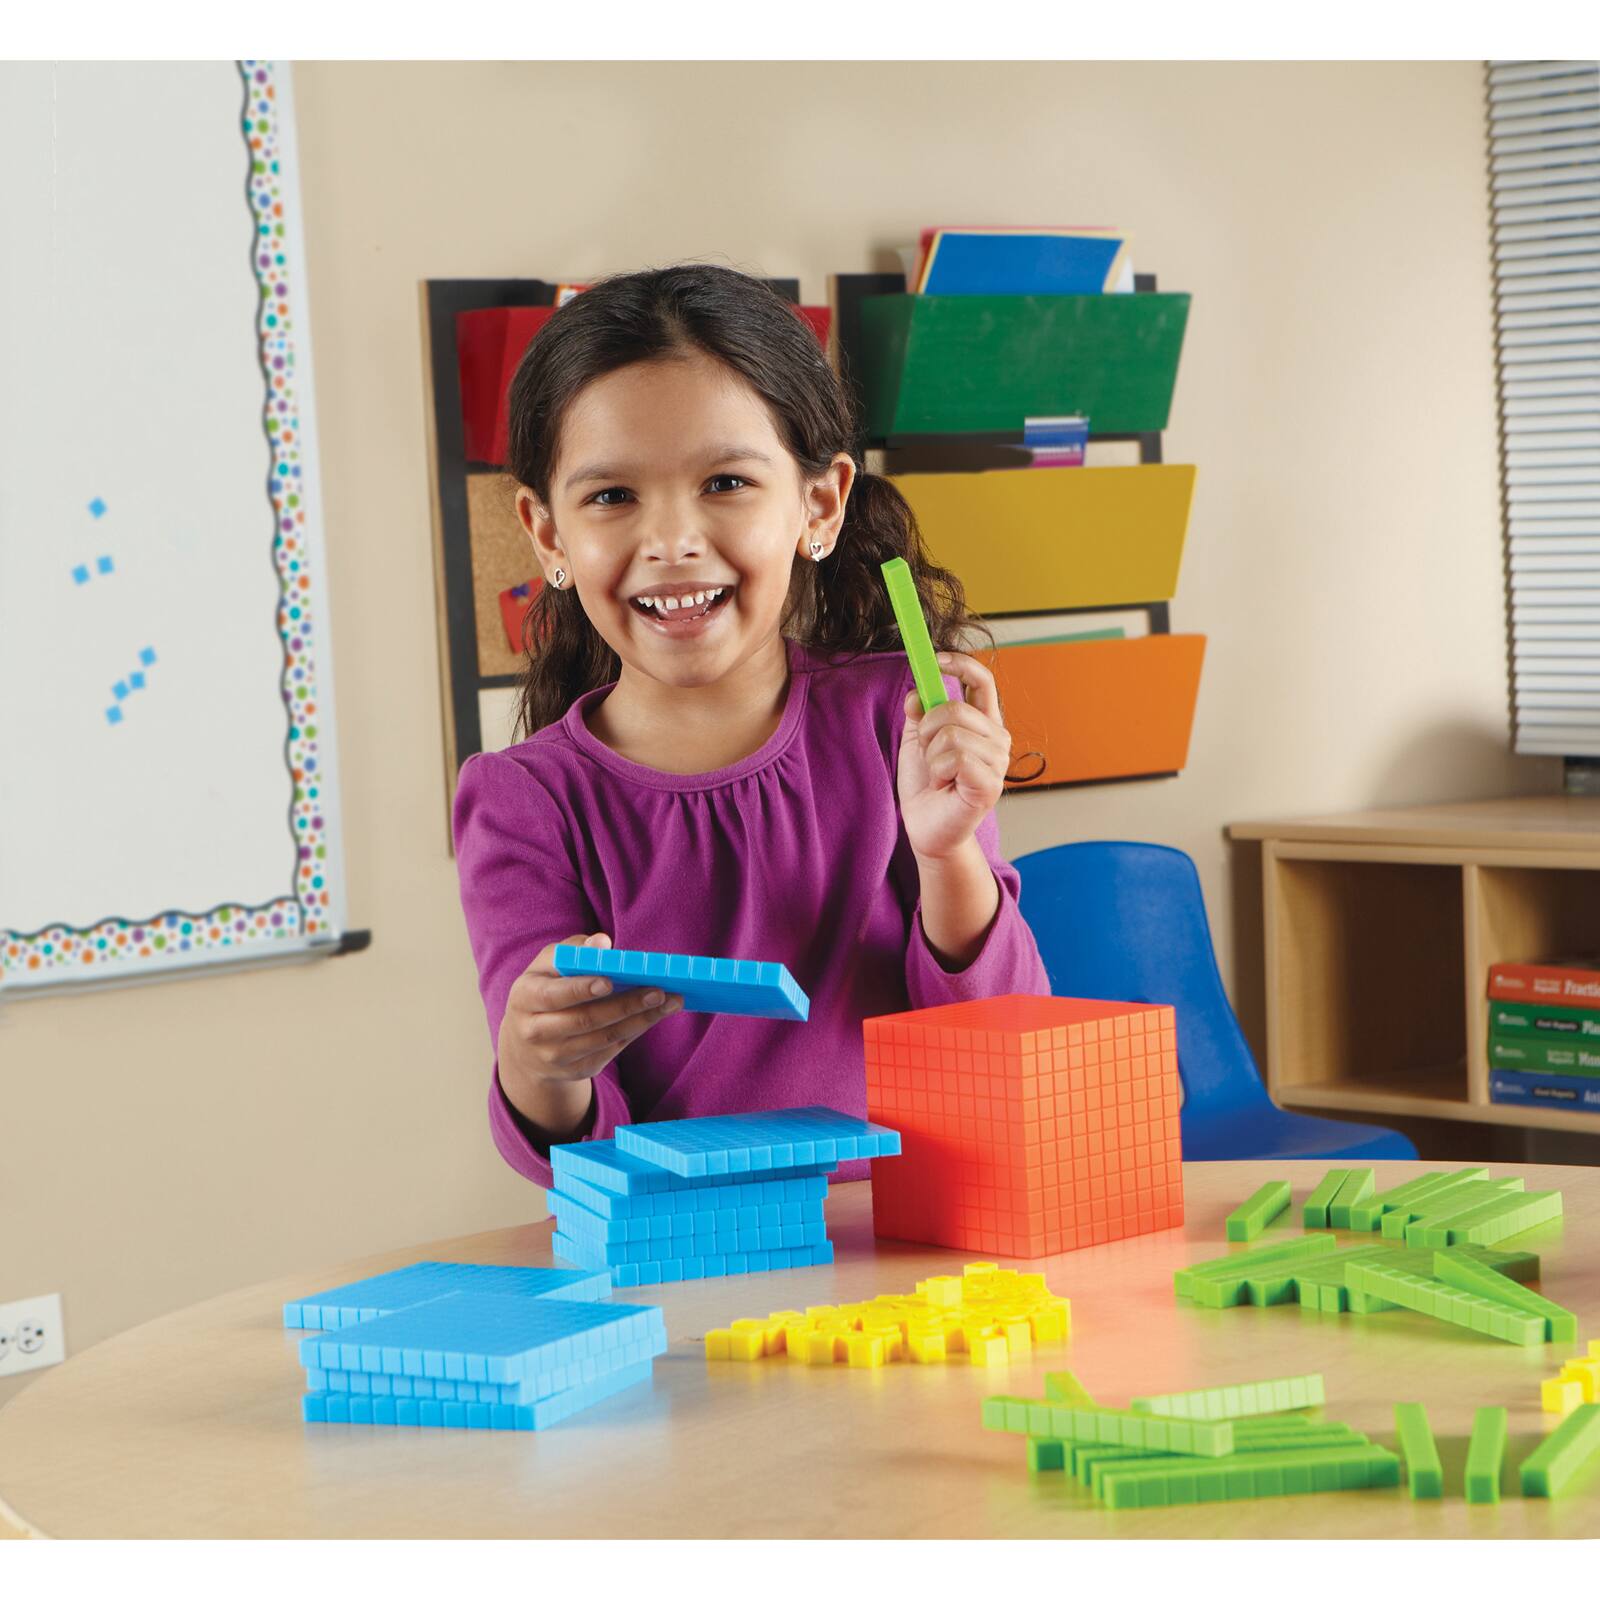 Learning Resources&#xAE; Brights!&#x2122; Base 10 Classroom Set